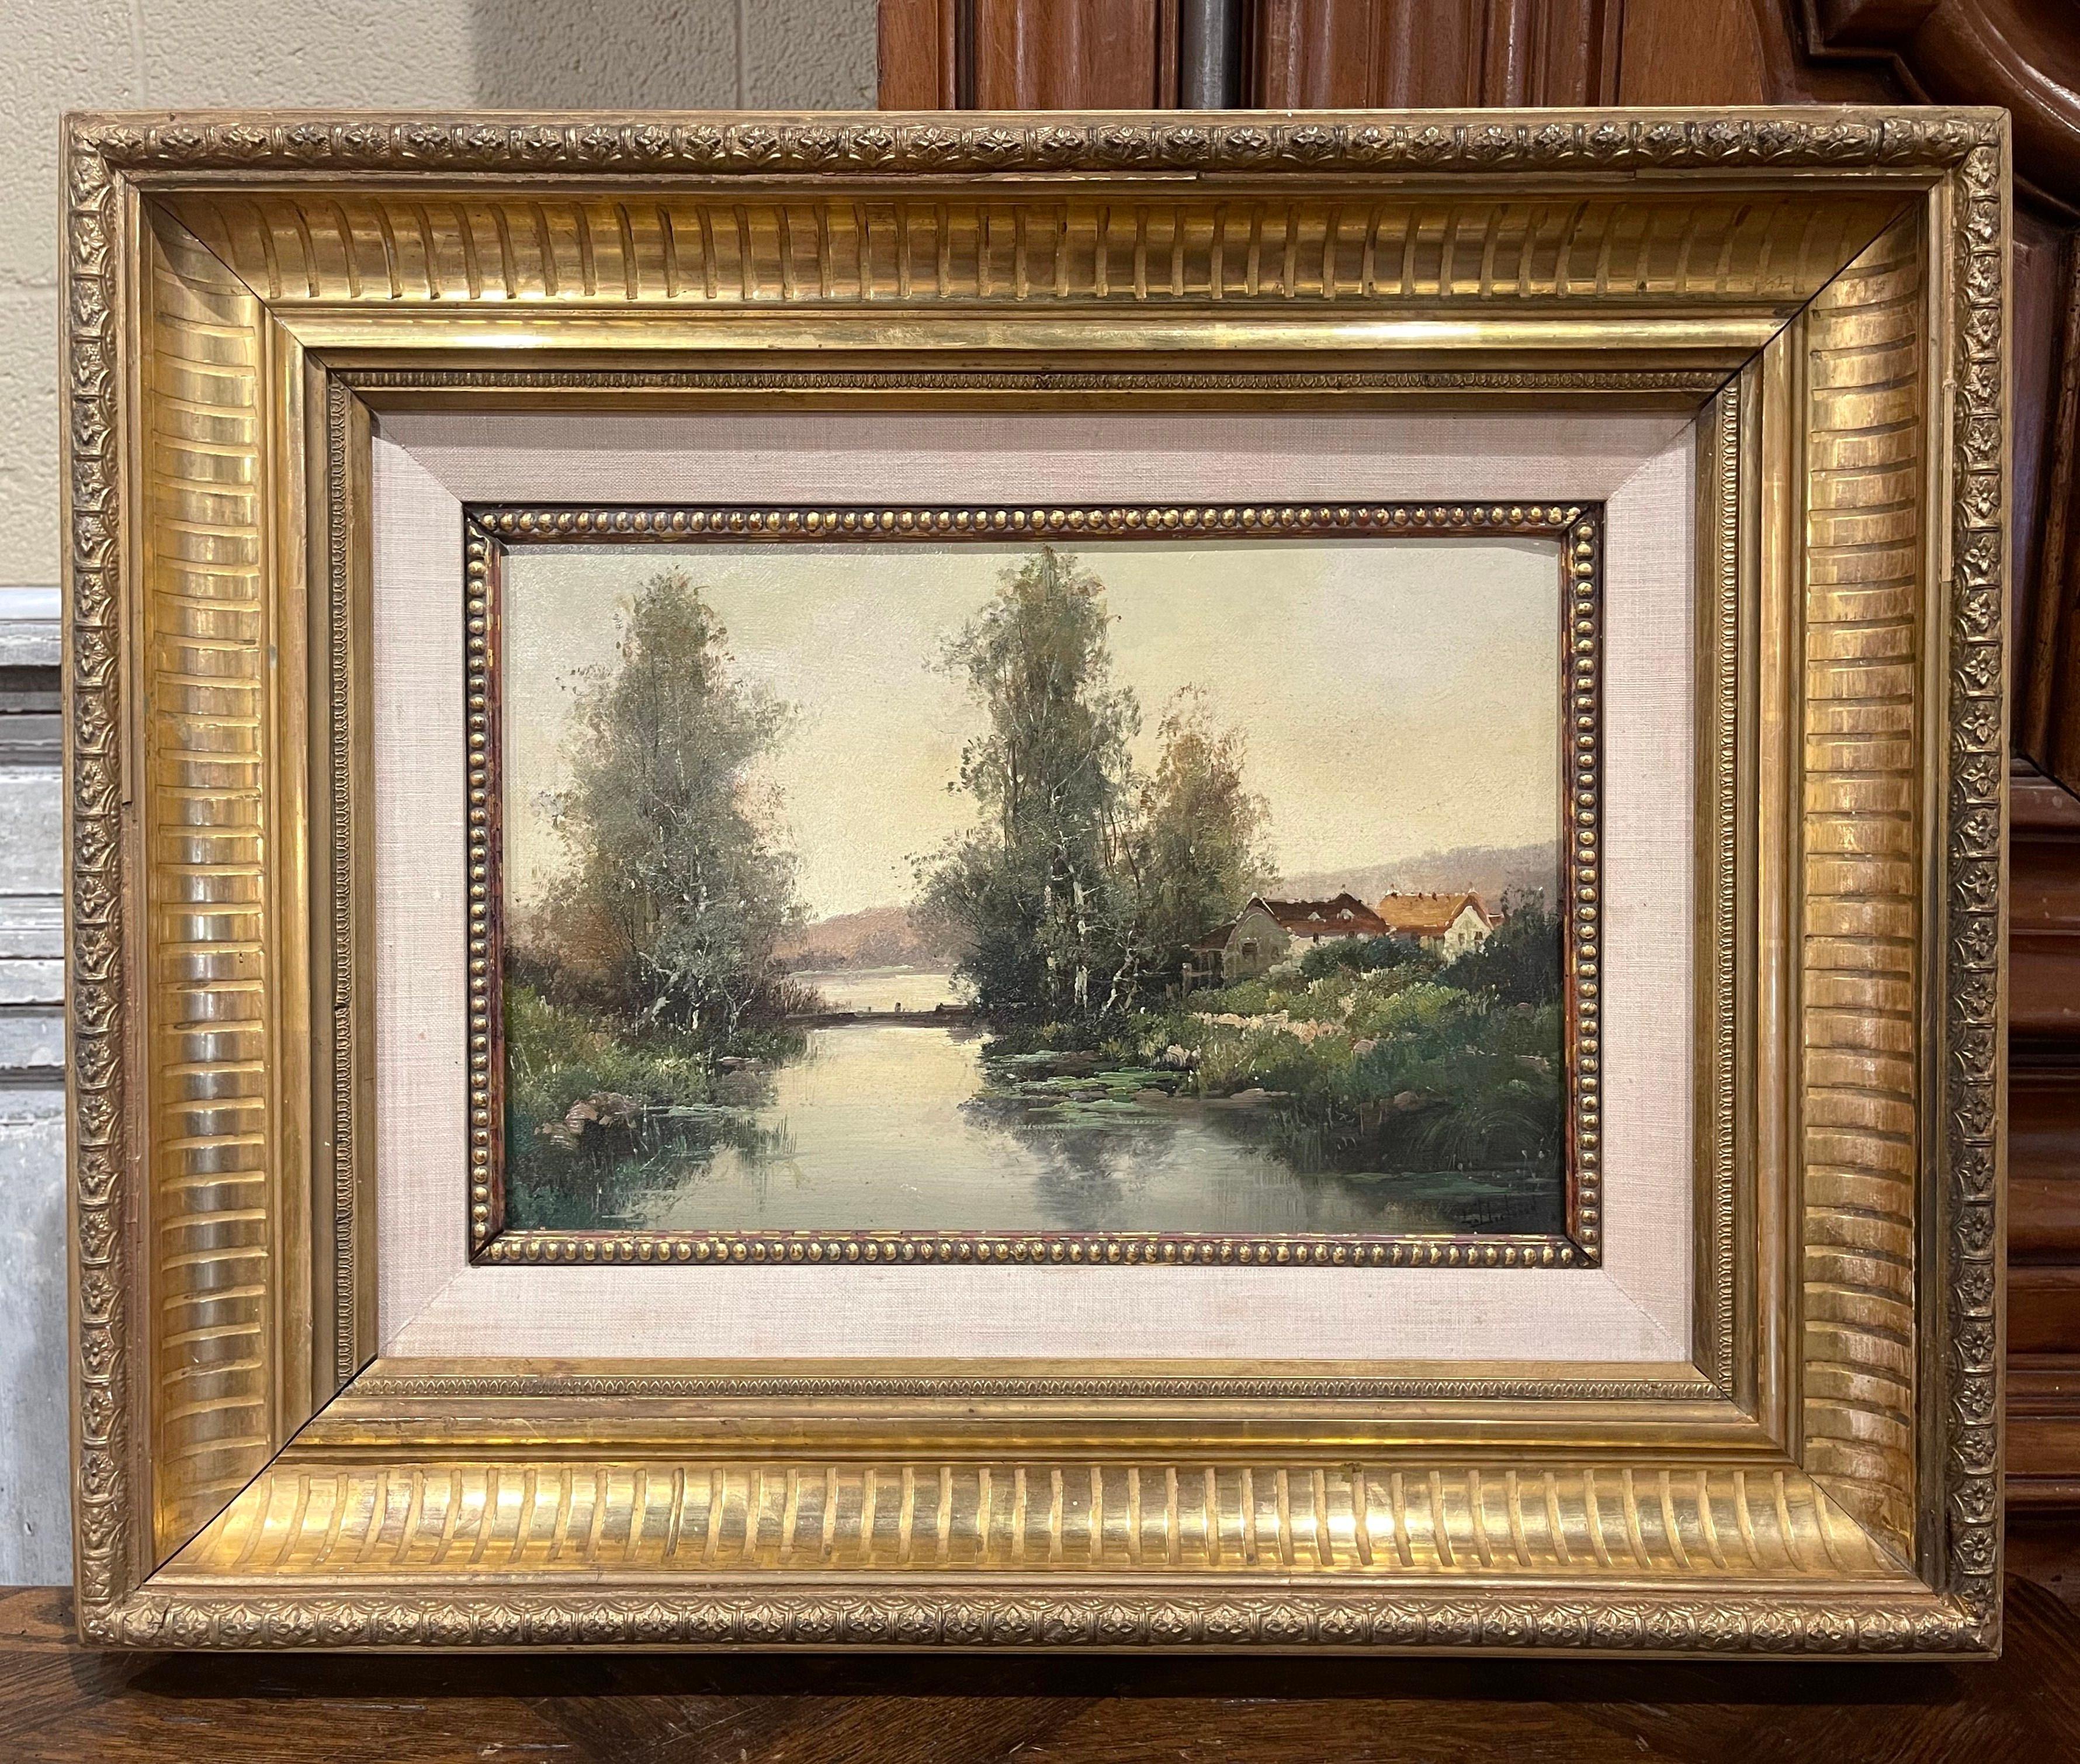 Carved 19th Century Framed Landscape Oil Painting Signed L. Dupuy for E. Galien-Laloue For Sale